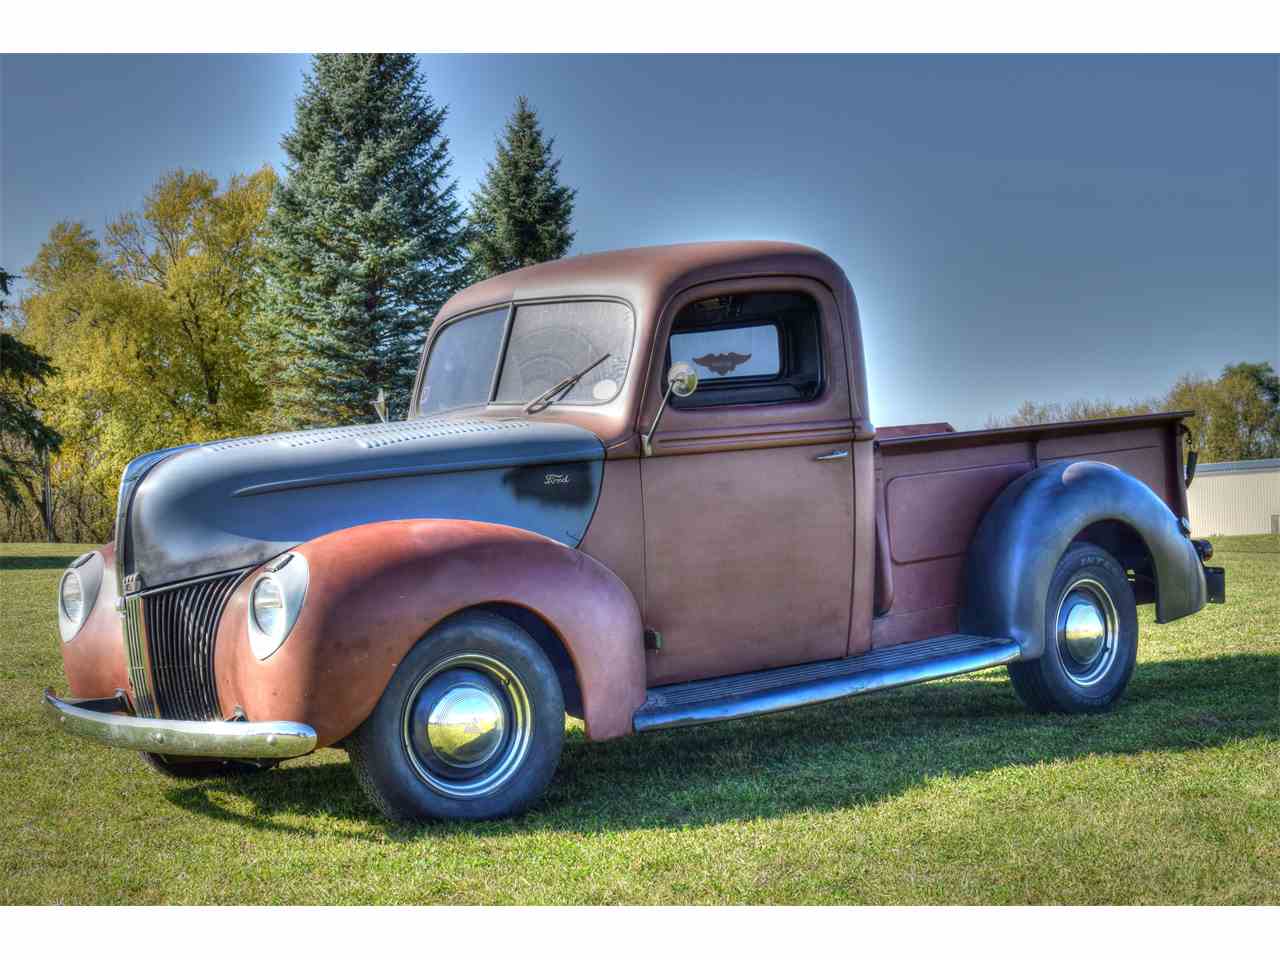 1940 Ford Pickup for Sale  ClassicCars.com  CC1032652